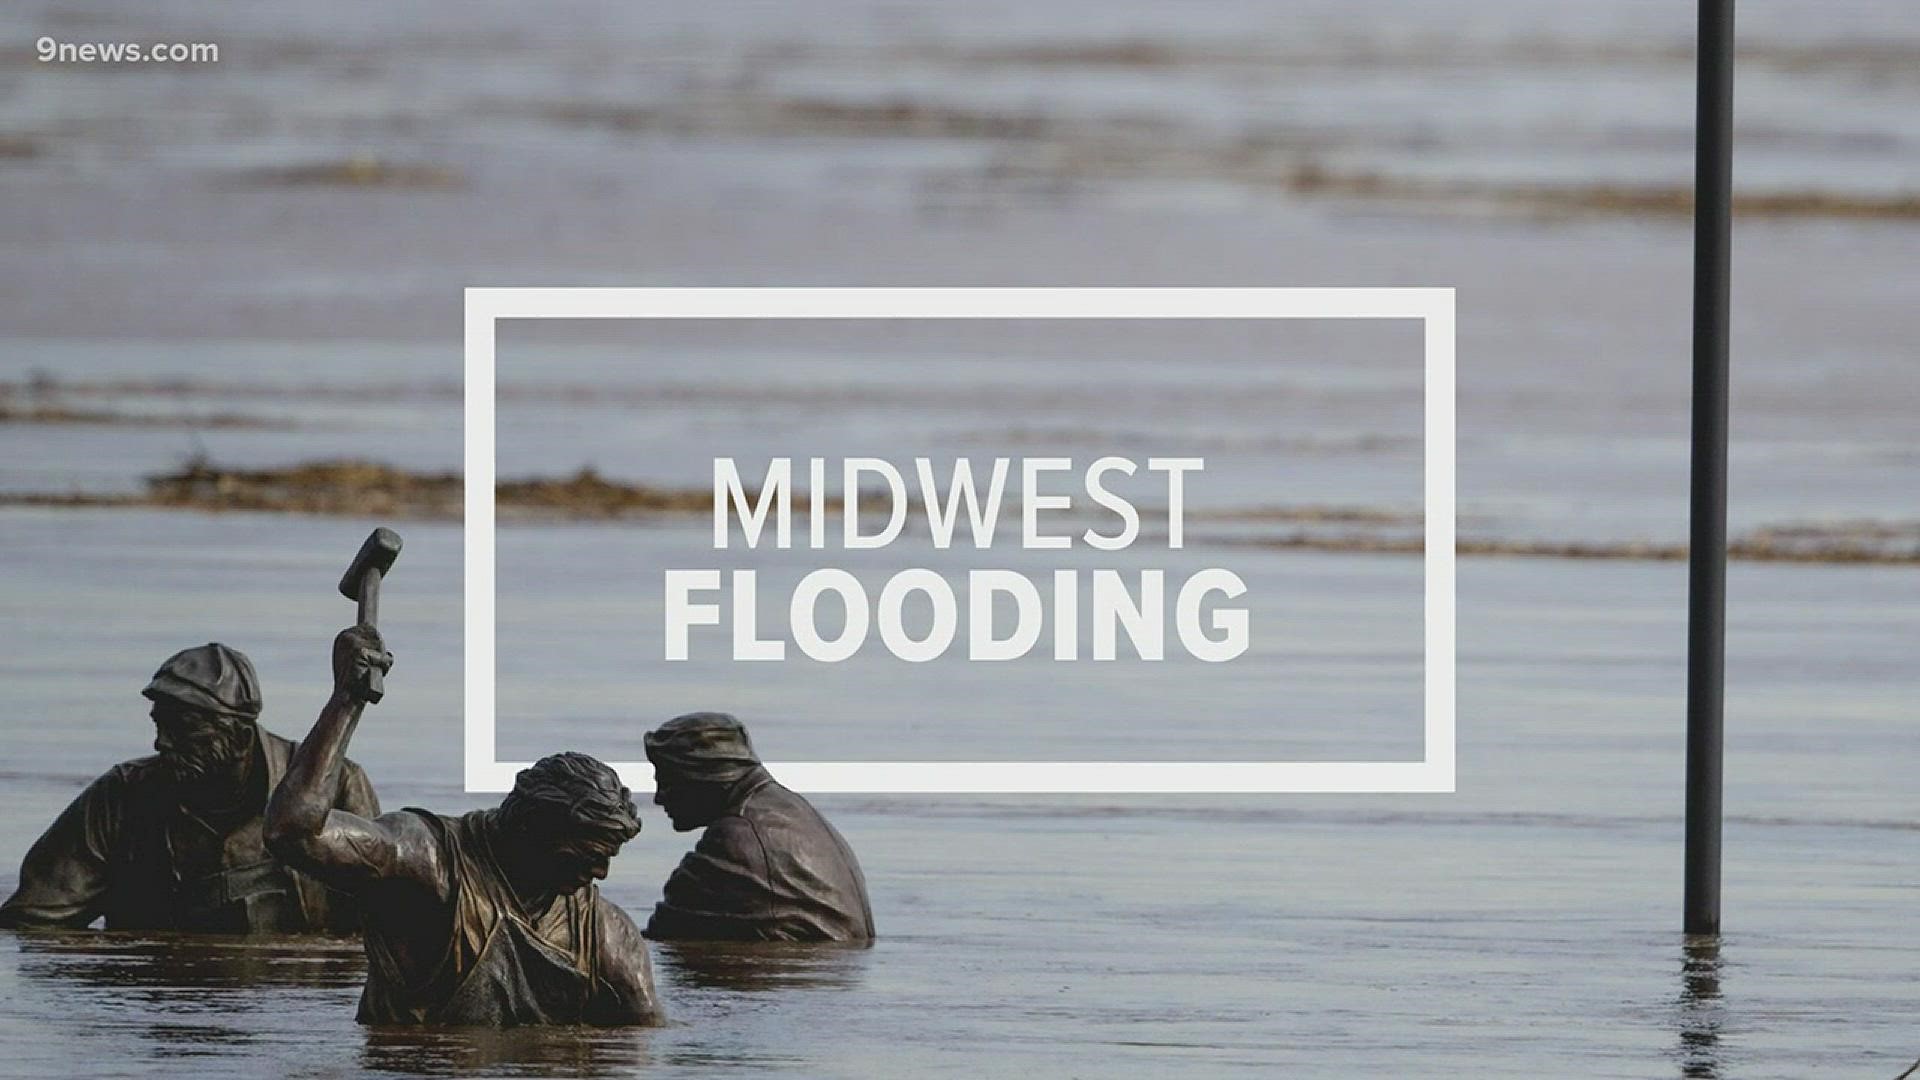 Meteorologist Cory Reppenhagen explains how the ingredients for this historic flooding were building in Nebraska for more than a month.